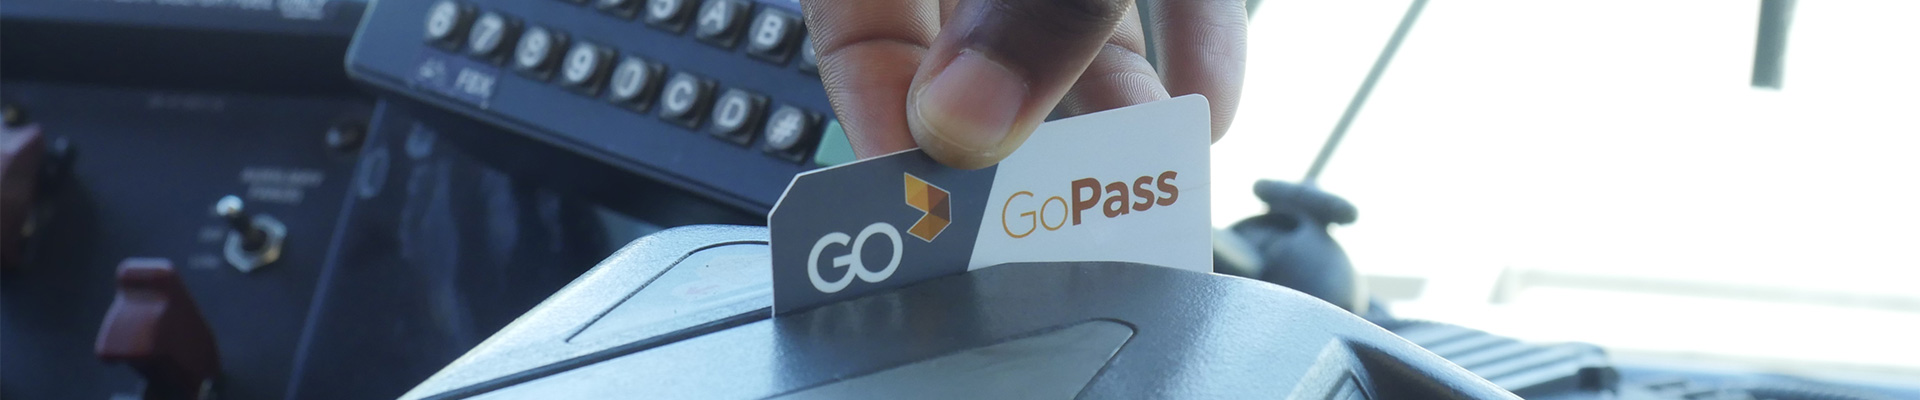 GoPass being swiped though onboard bus fare box